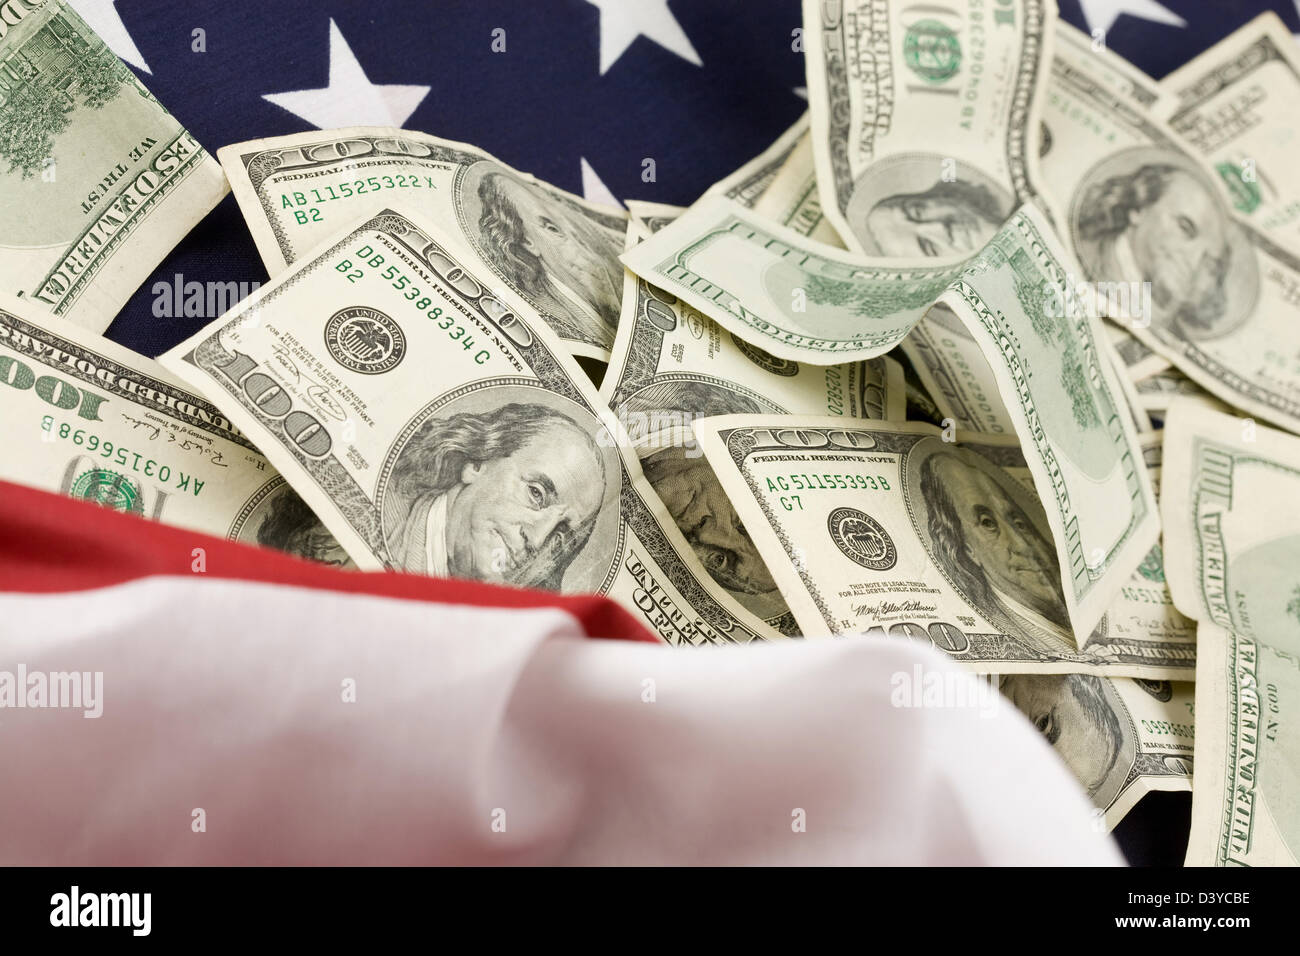 large stack or pile of hundred dollar bills in US currency Stock Photo